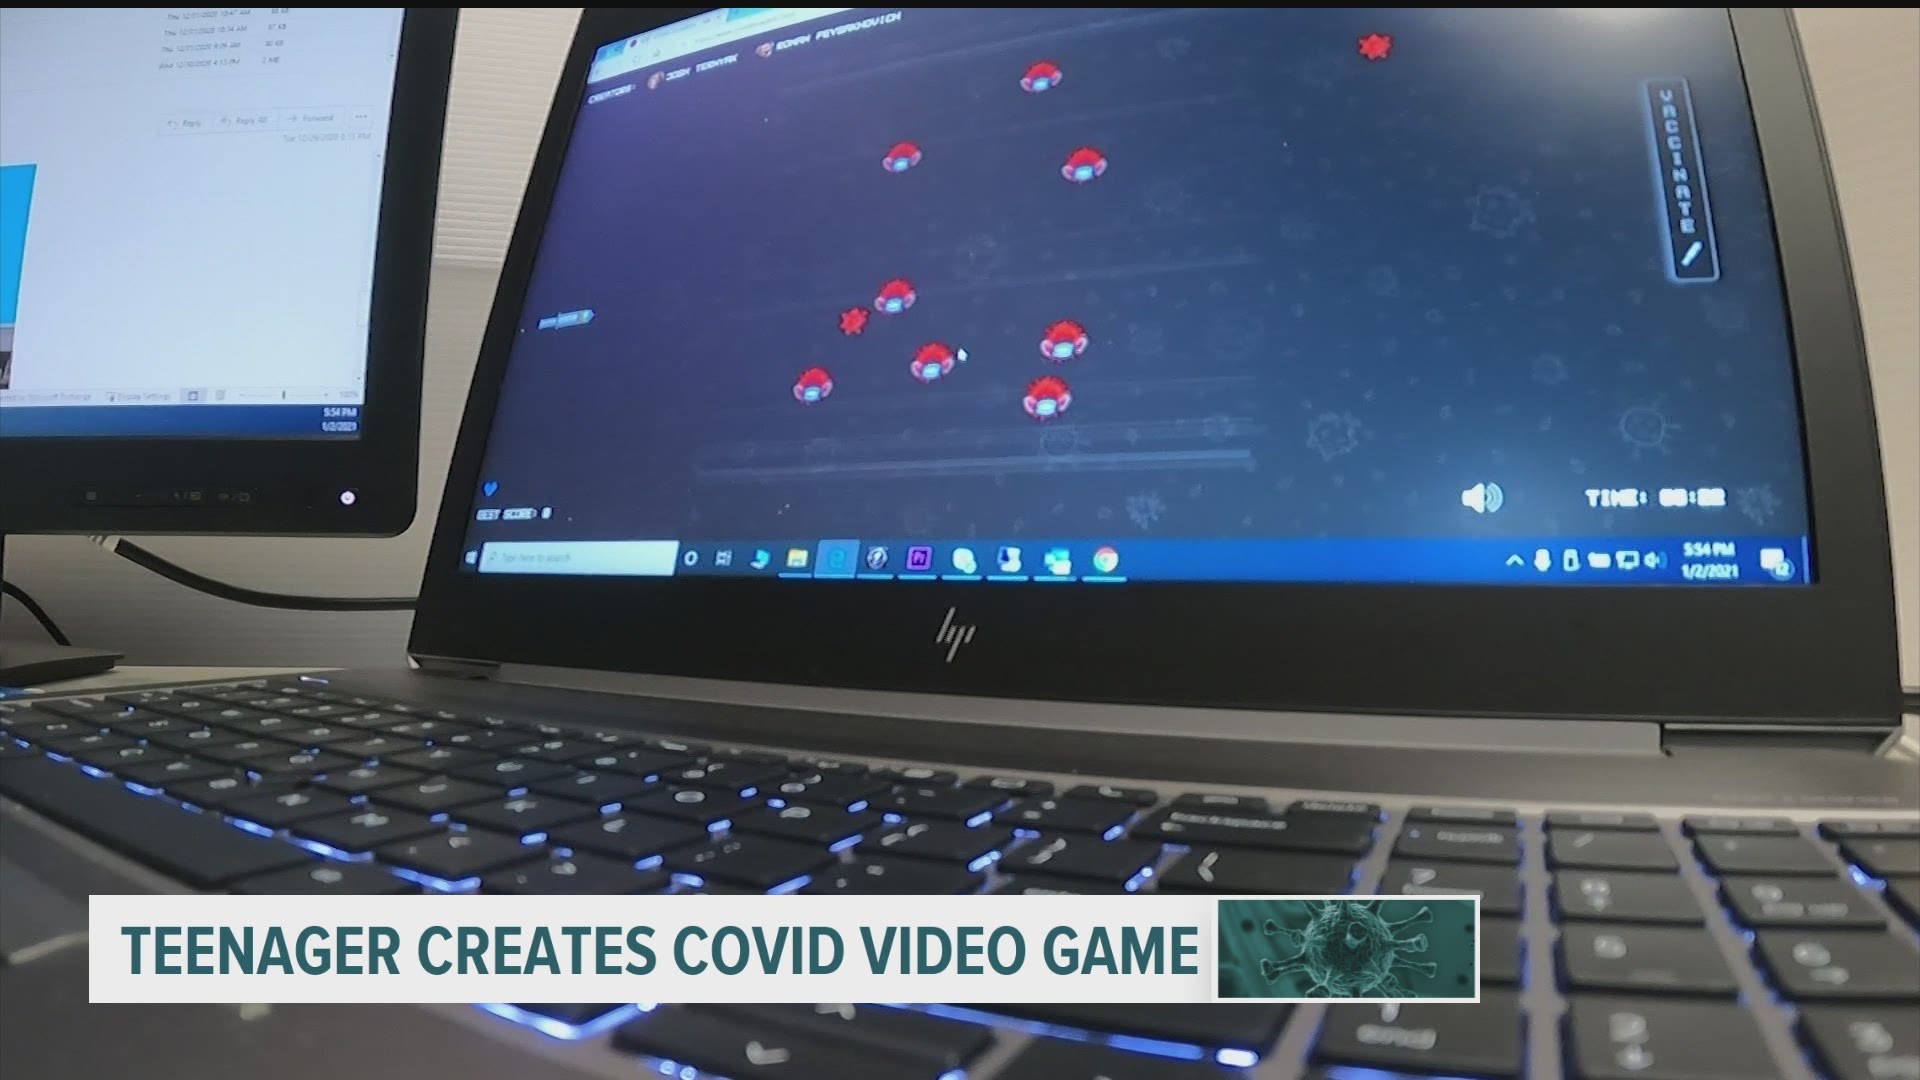 In a effort to shed a positive light on the the COVID-19, teen creates an online video game.